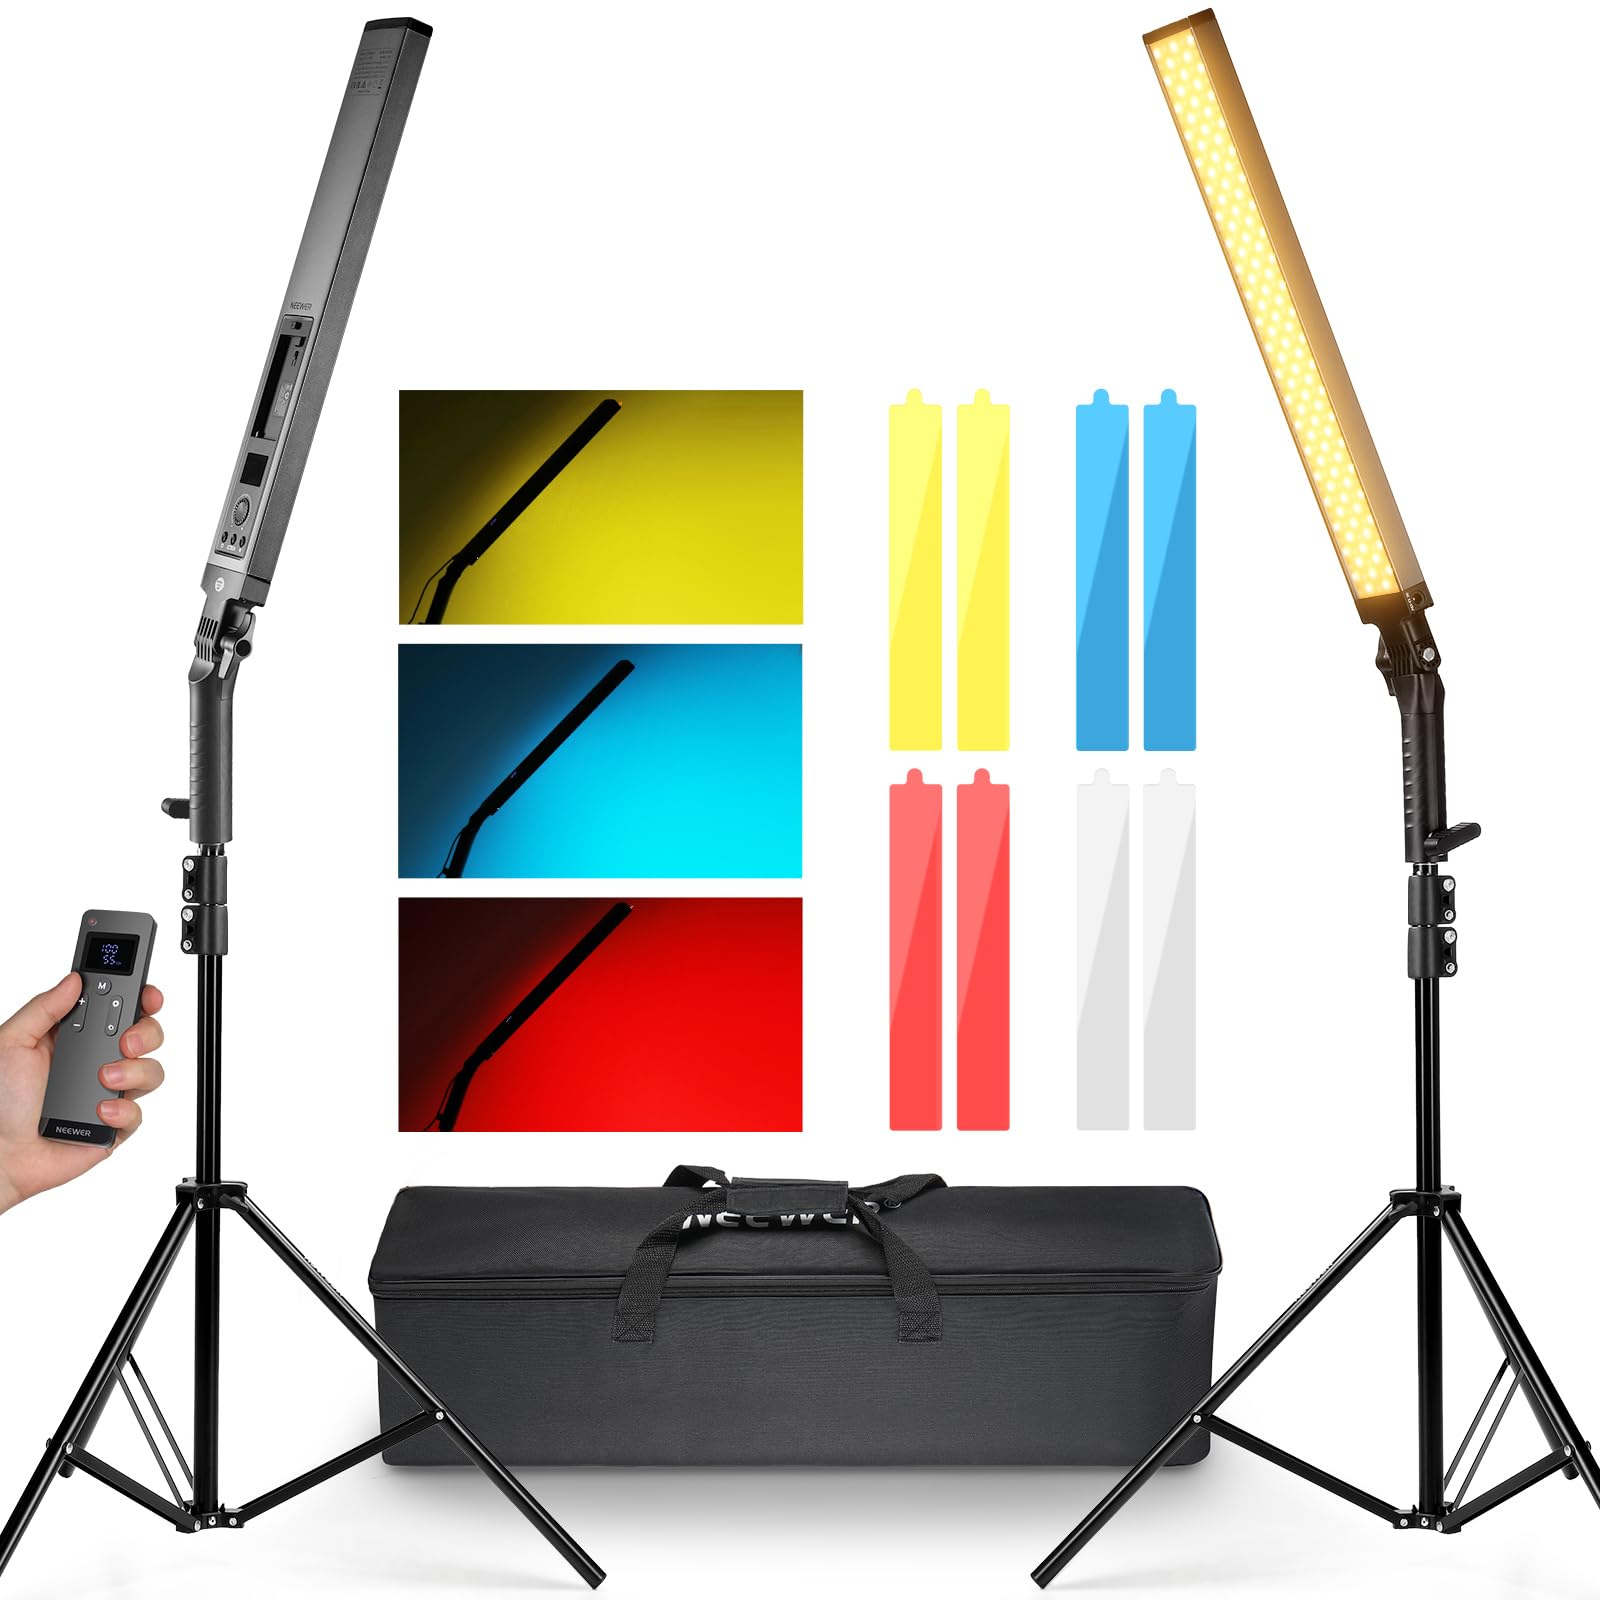 NEEWER Upgraded LED Video Light Stick & 2.4G Remote Kit, 2 Pack Handheld Dimmable 3200K~5600K CRI97+ Video Lighting with Stands/Filters/Carry Bag for YouTube Video Recording Photography Gaming, BH20B